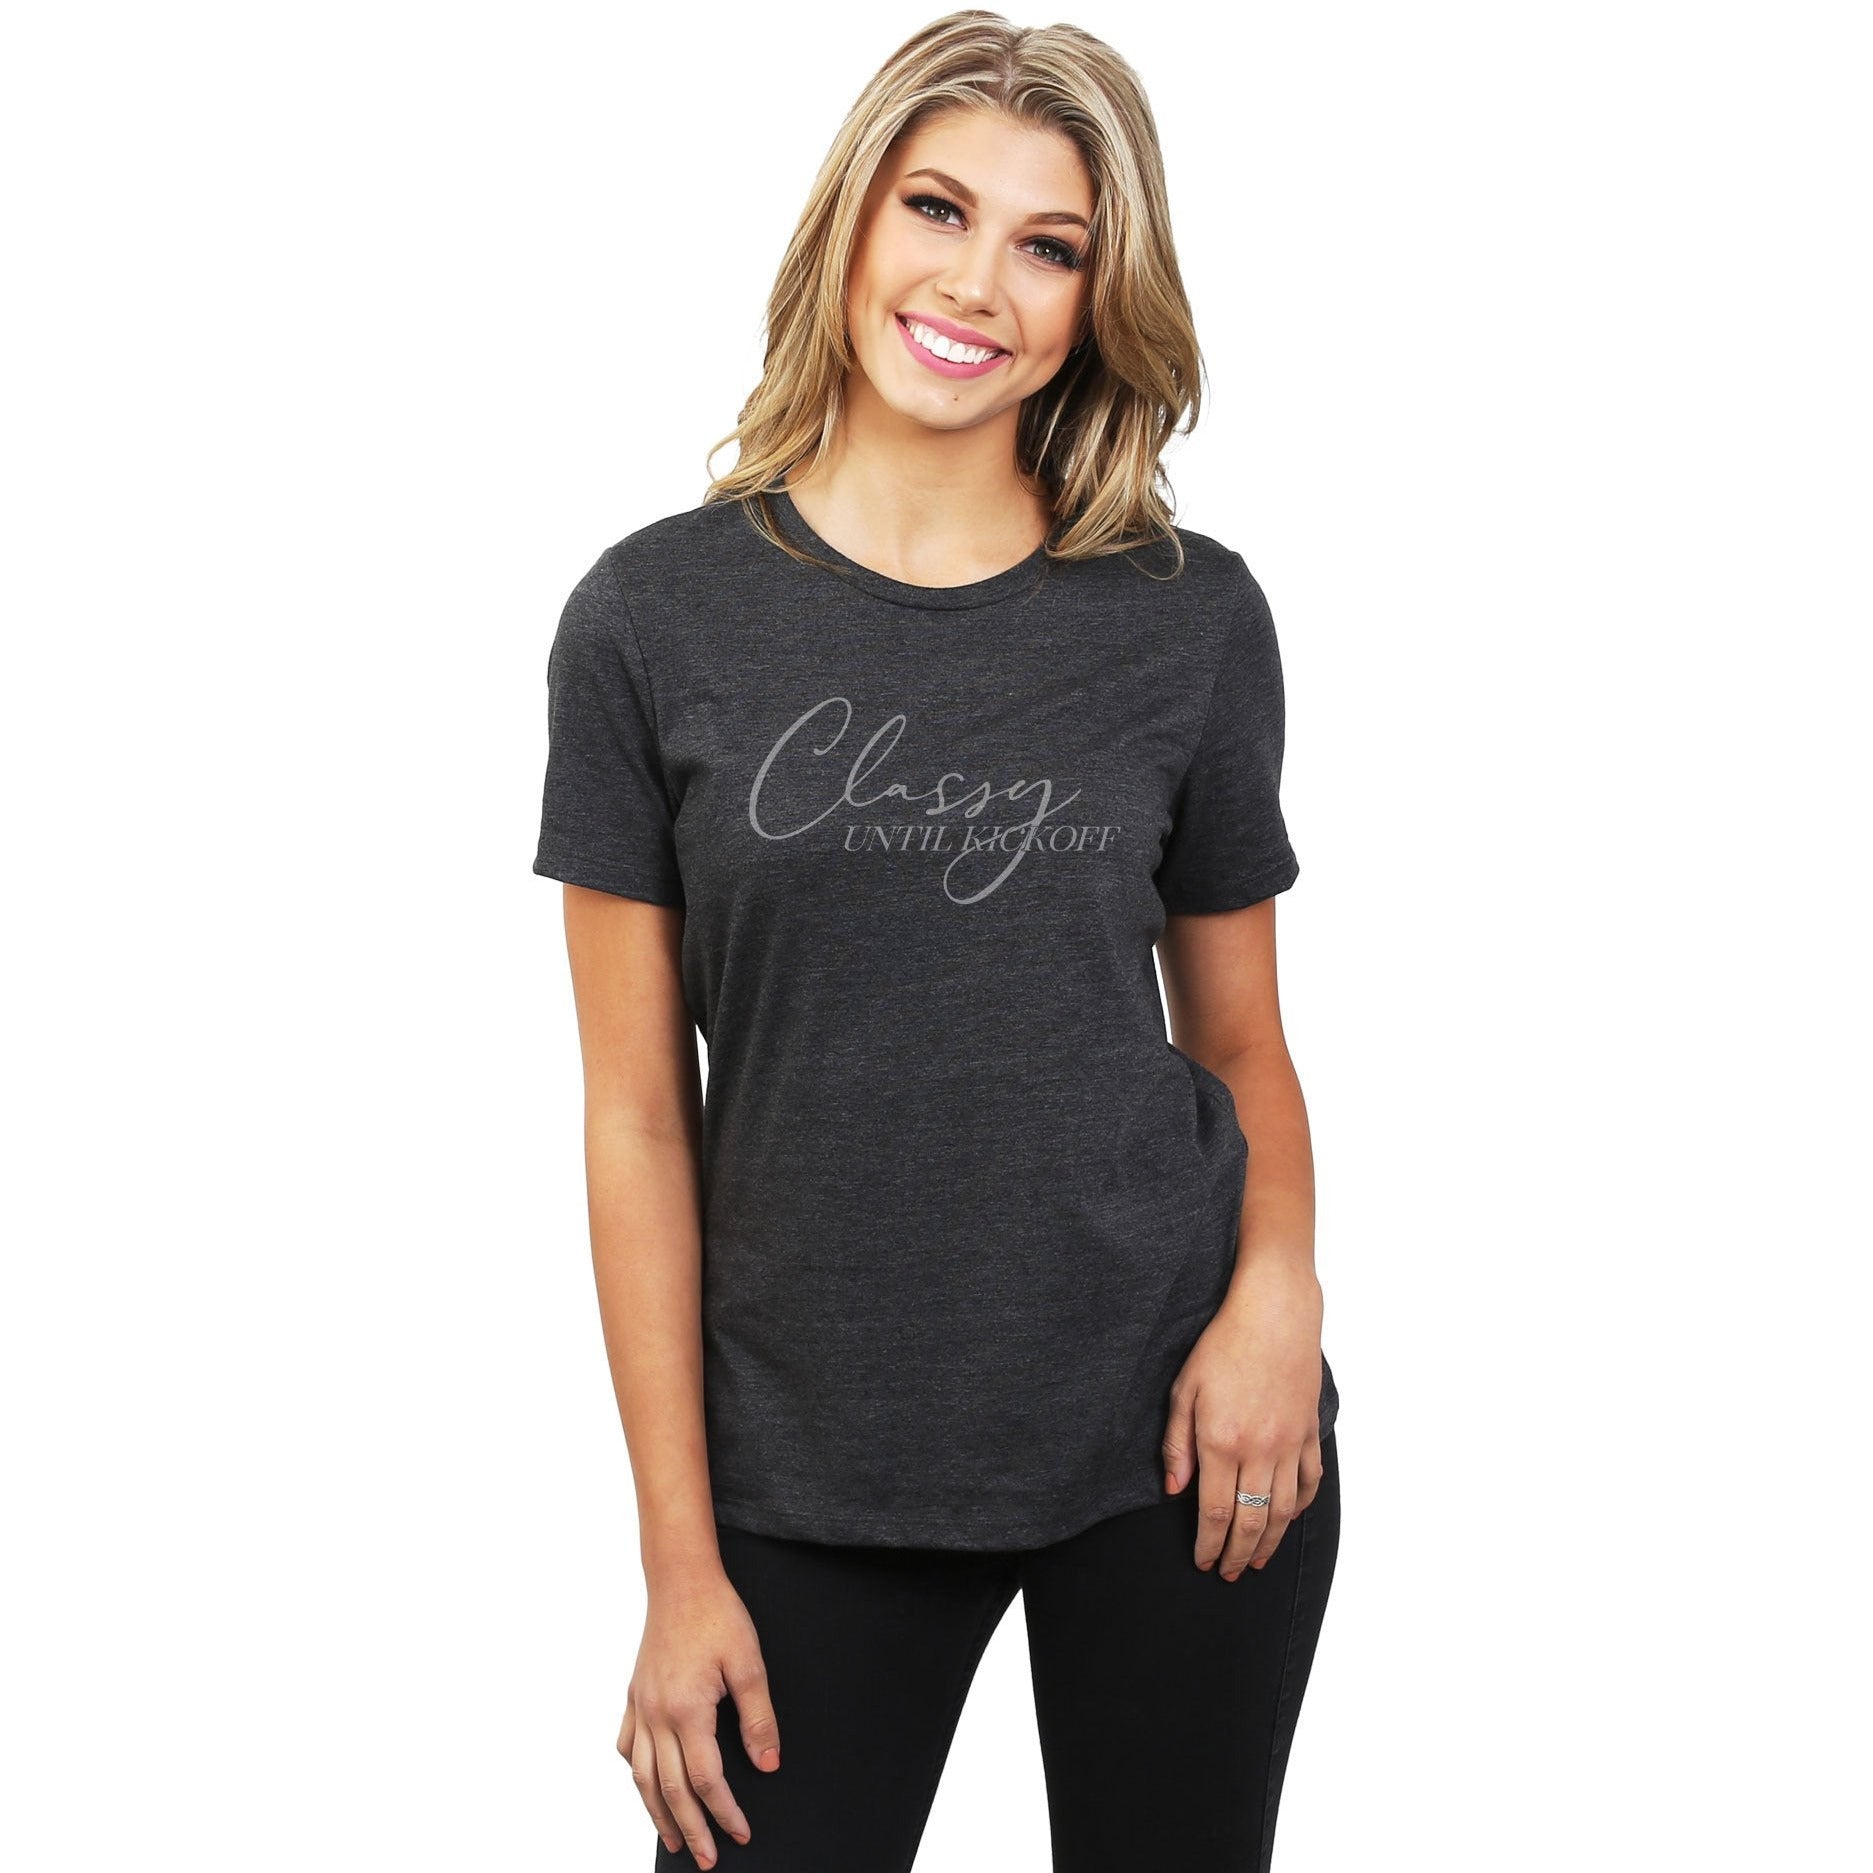 Classy Until Kickoff Women's Relaxed Crewneck T-Shirt Top Tee Charcoal Model
